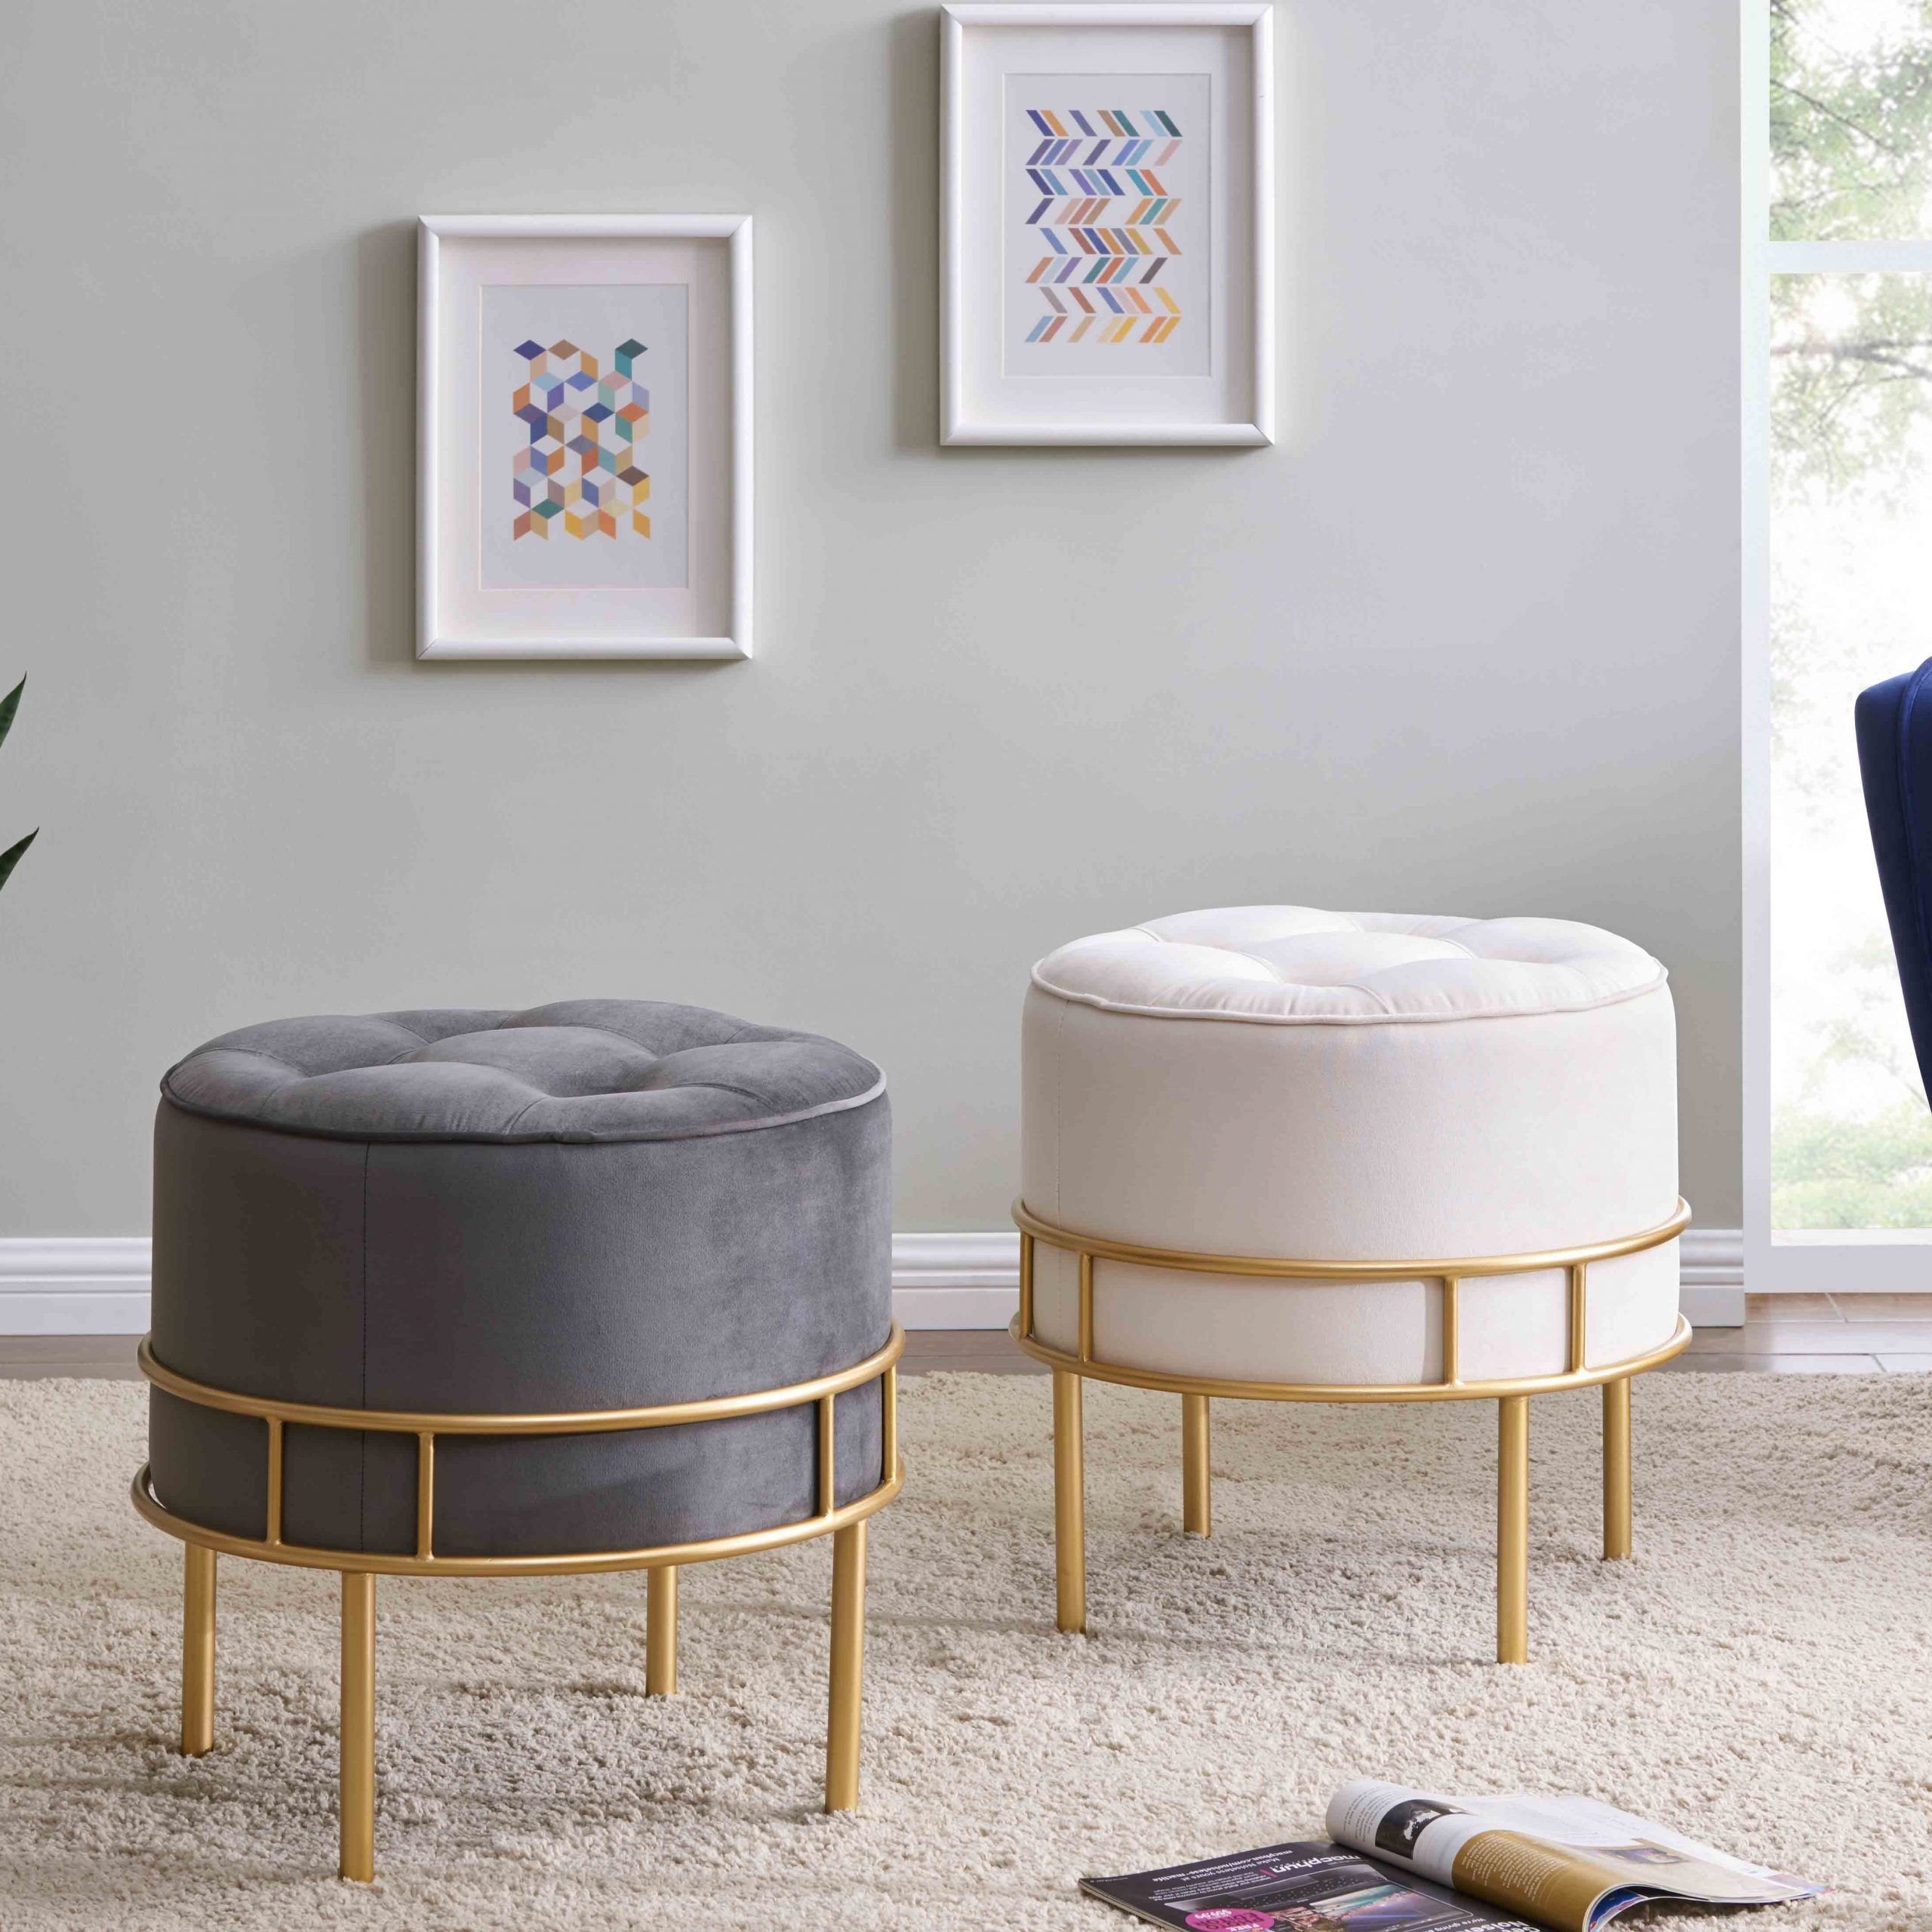 Lorient Velvet Fabric Tufted Round Ottoman, Serene Light Cream/ Gold Or With Regard To Cream Wool Felted Pouf Ottomans (View 6 of 20)